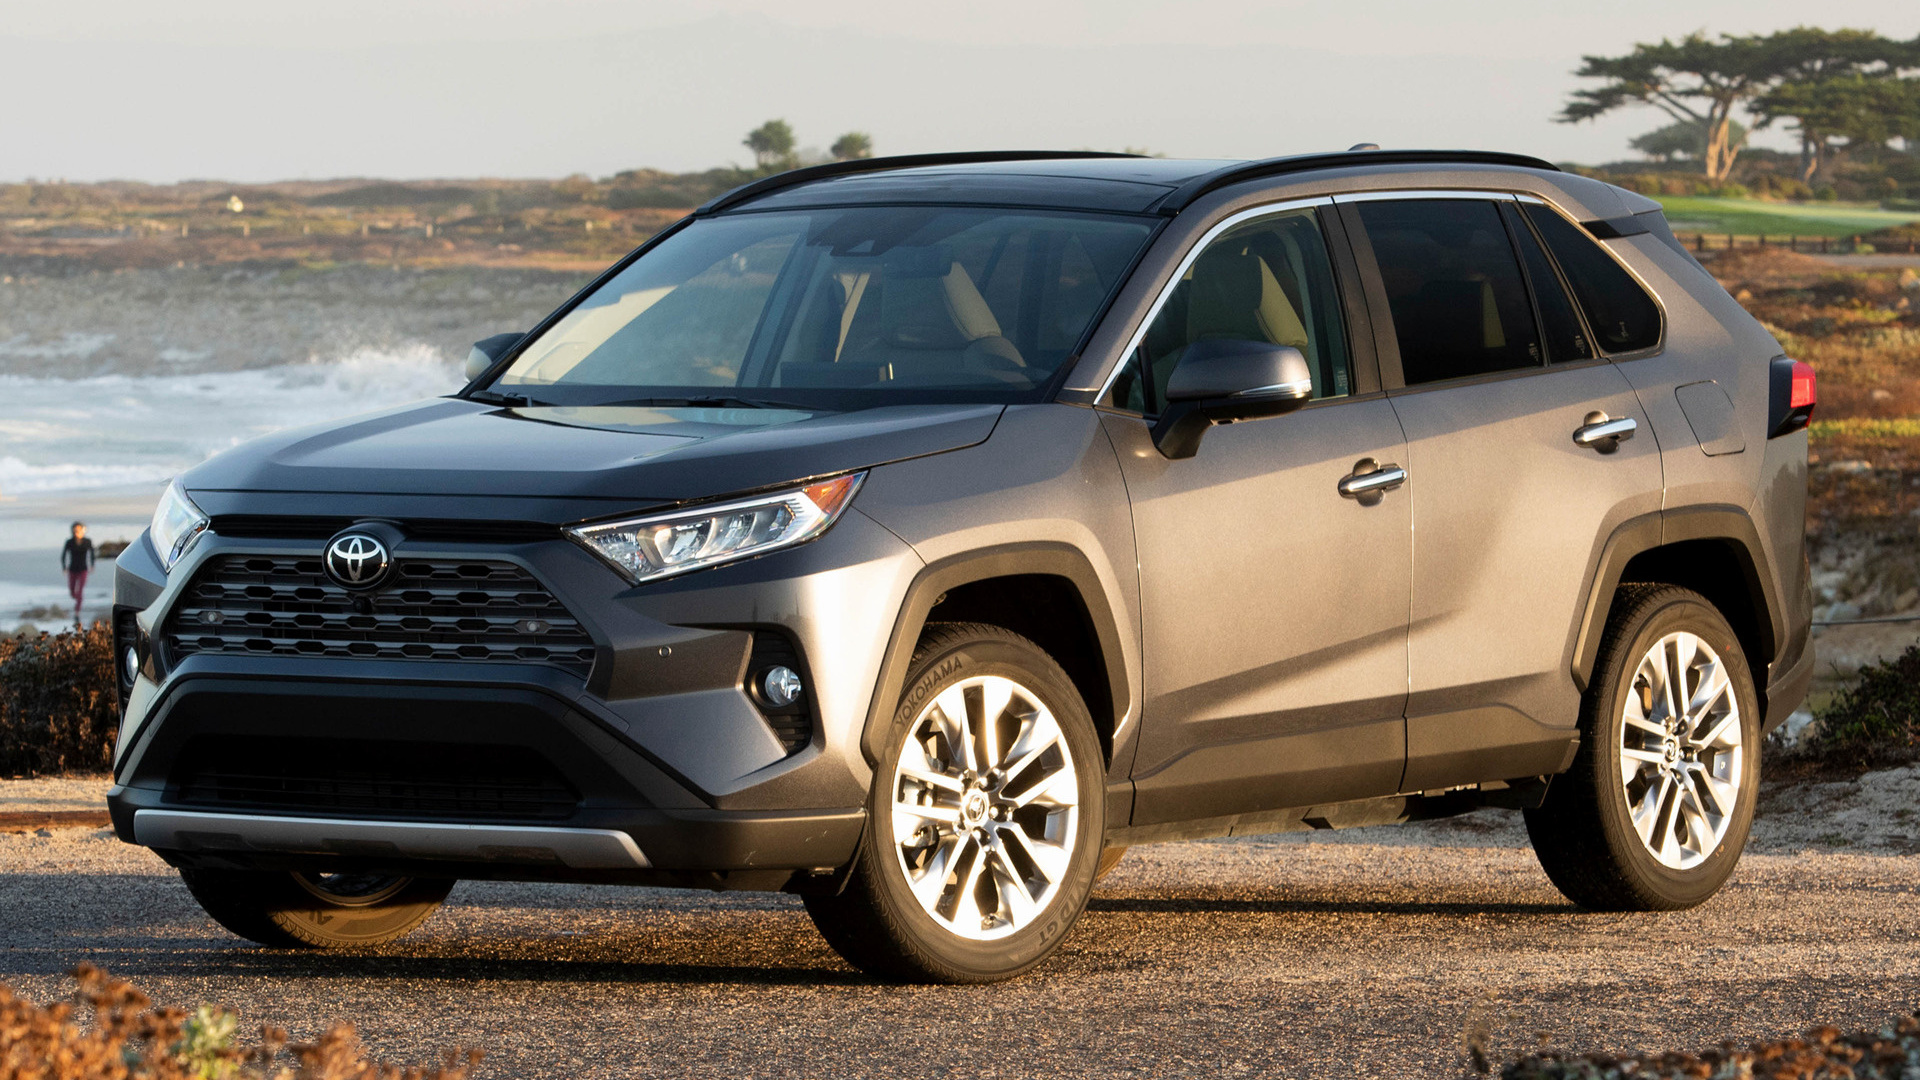 2019 Toyota RAV4 (US) Wallpapers and HD Images Car Pixel